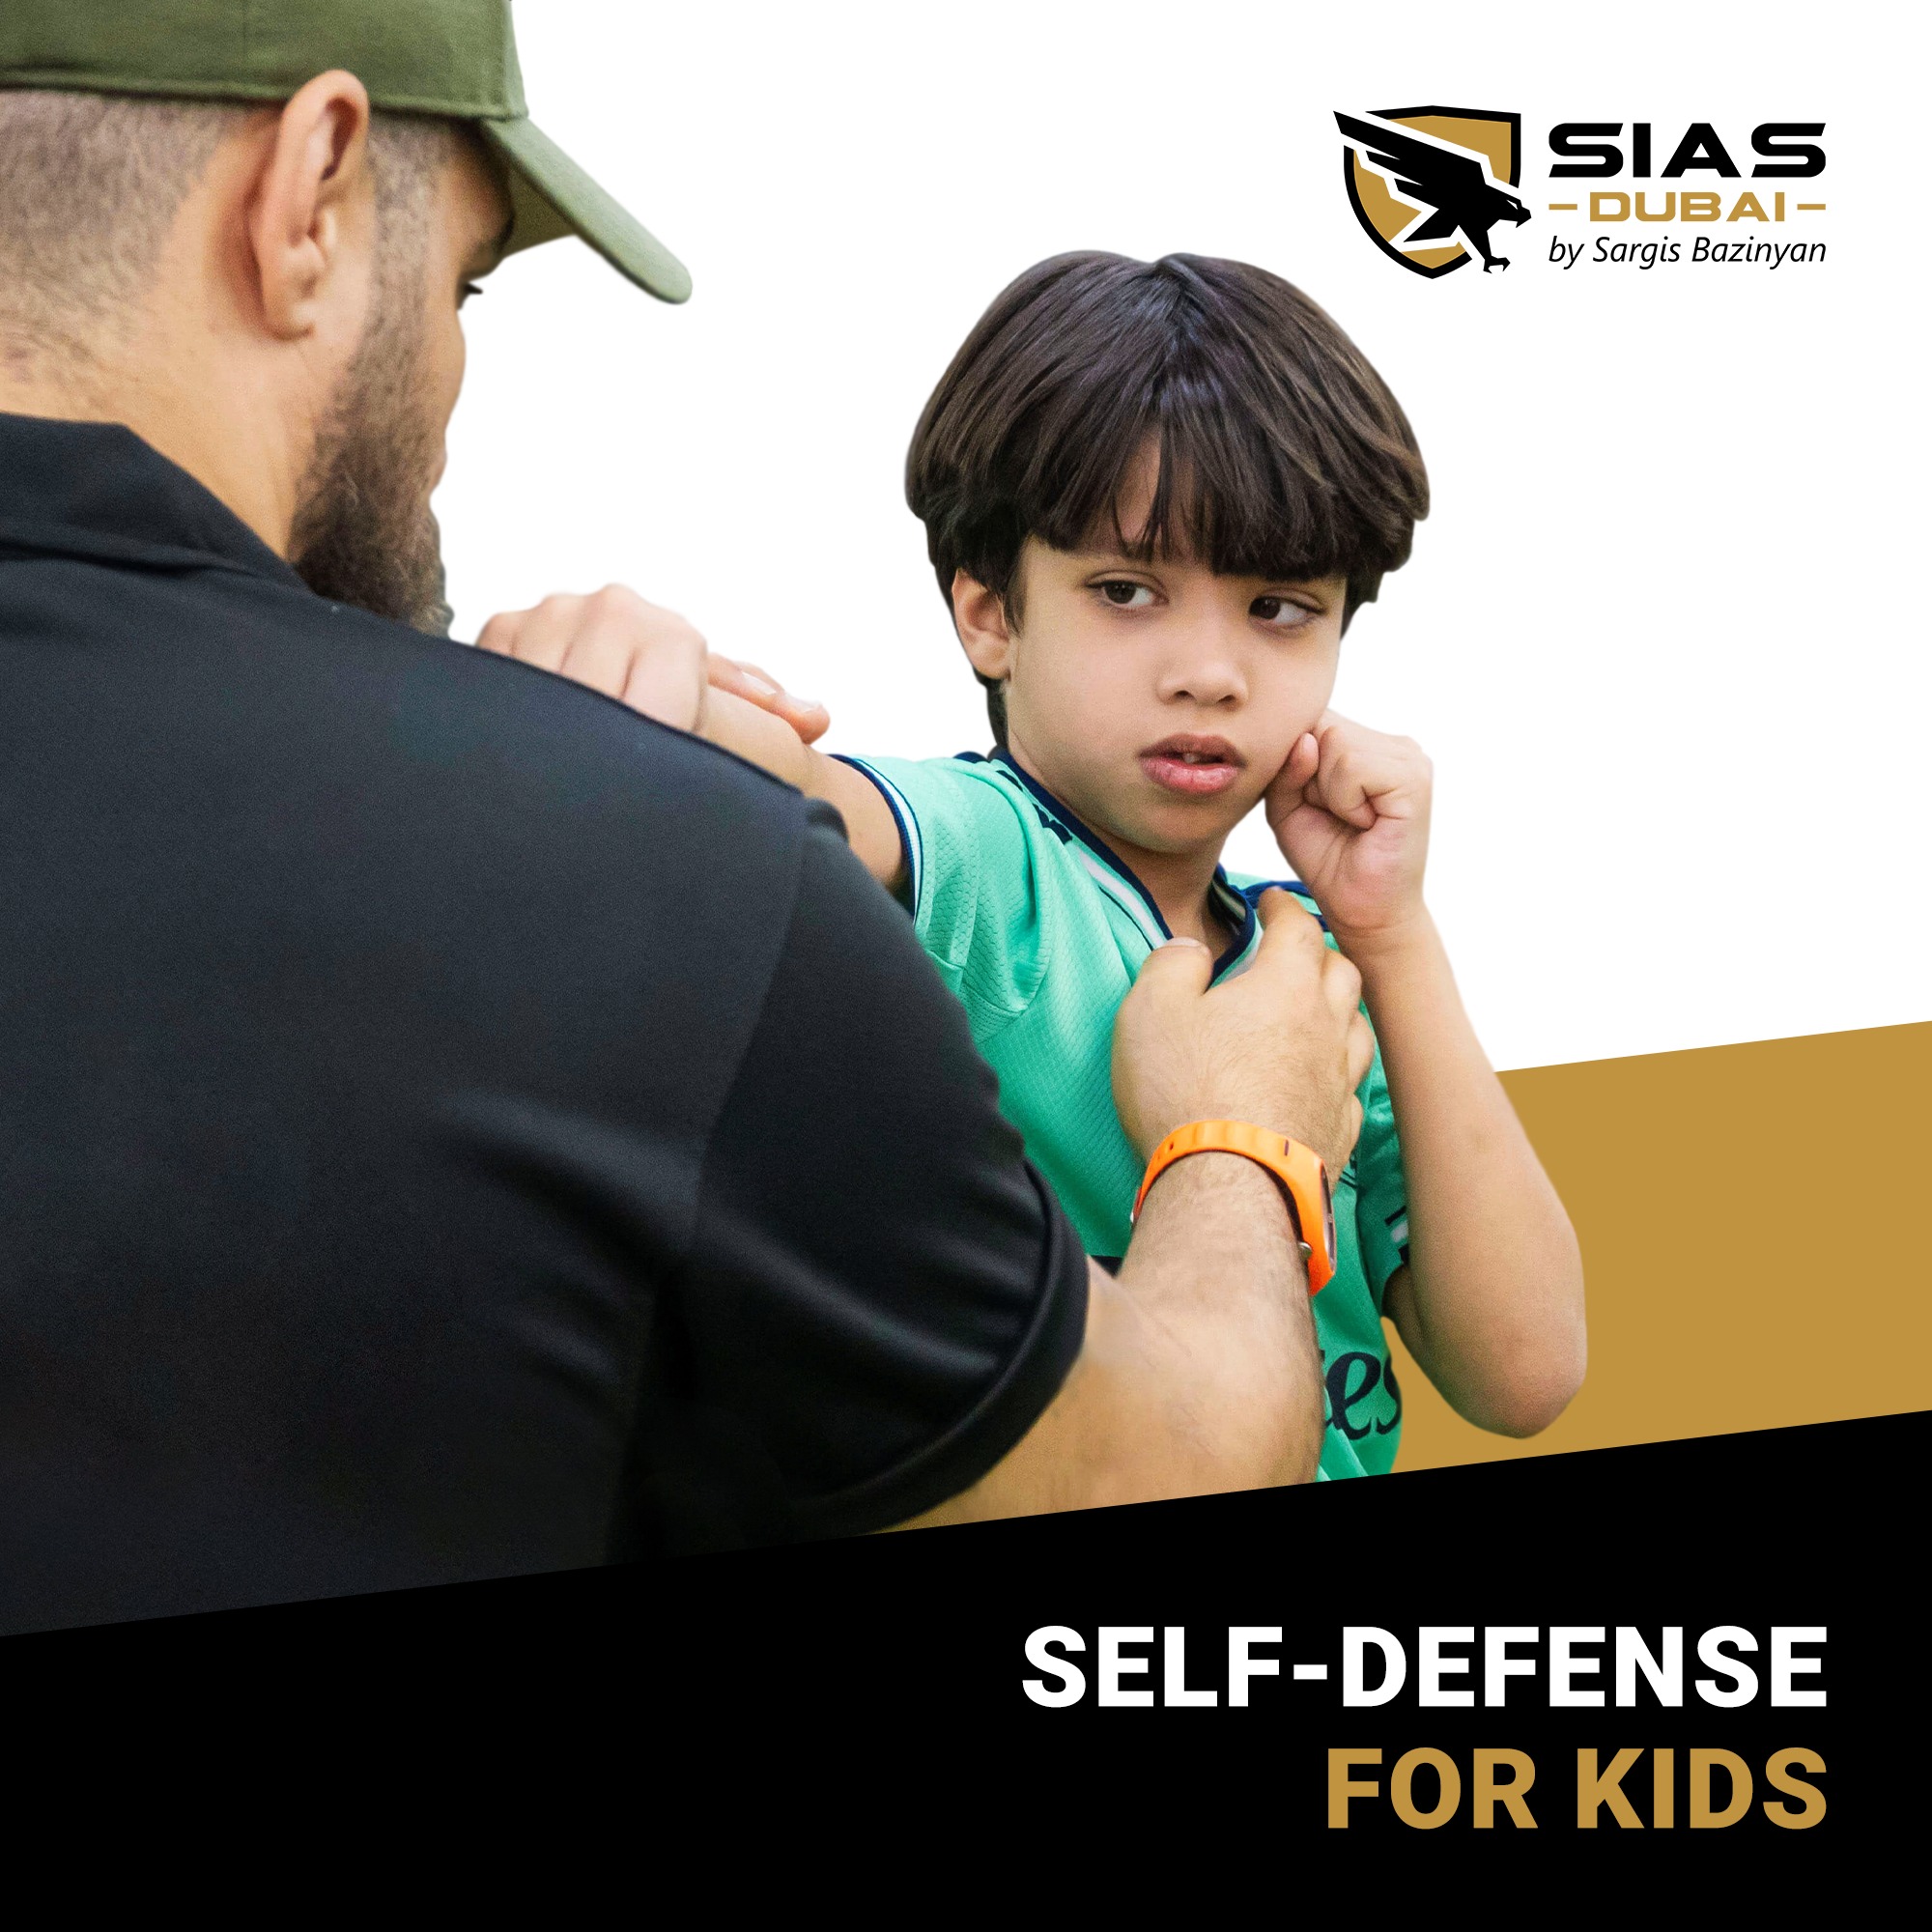 Why is Self Defense So Important for Kids